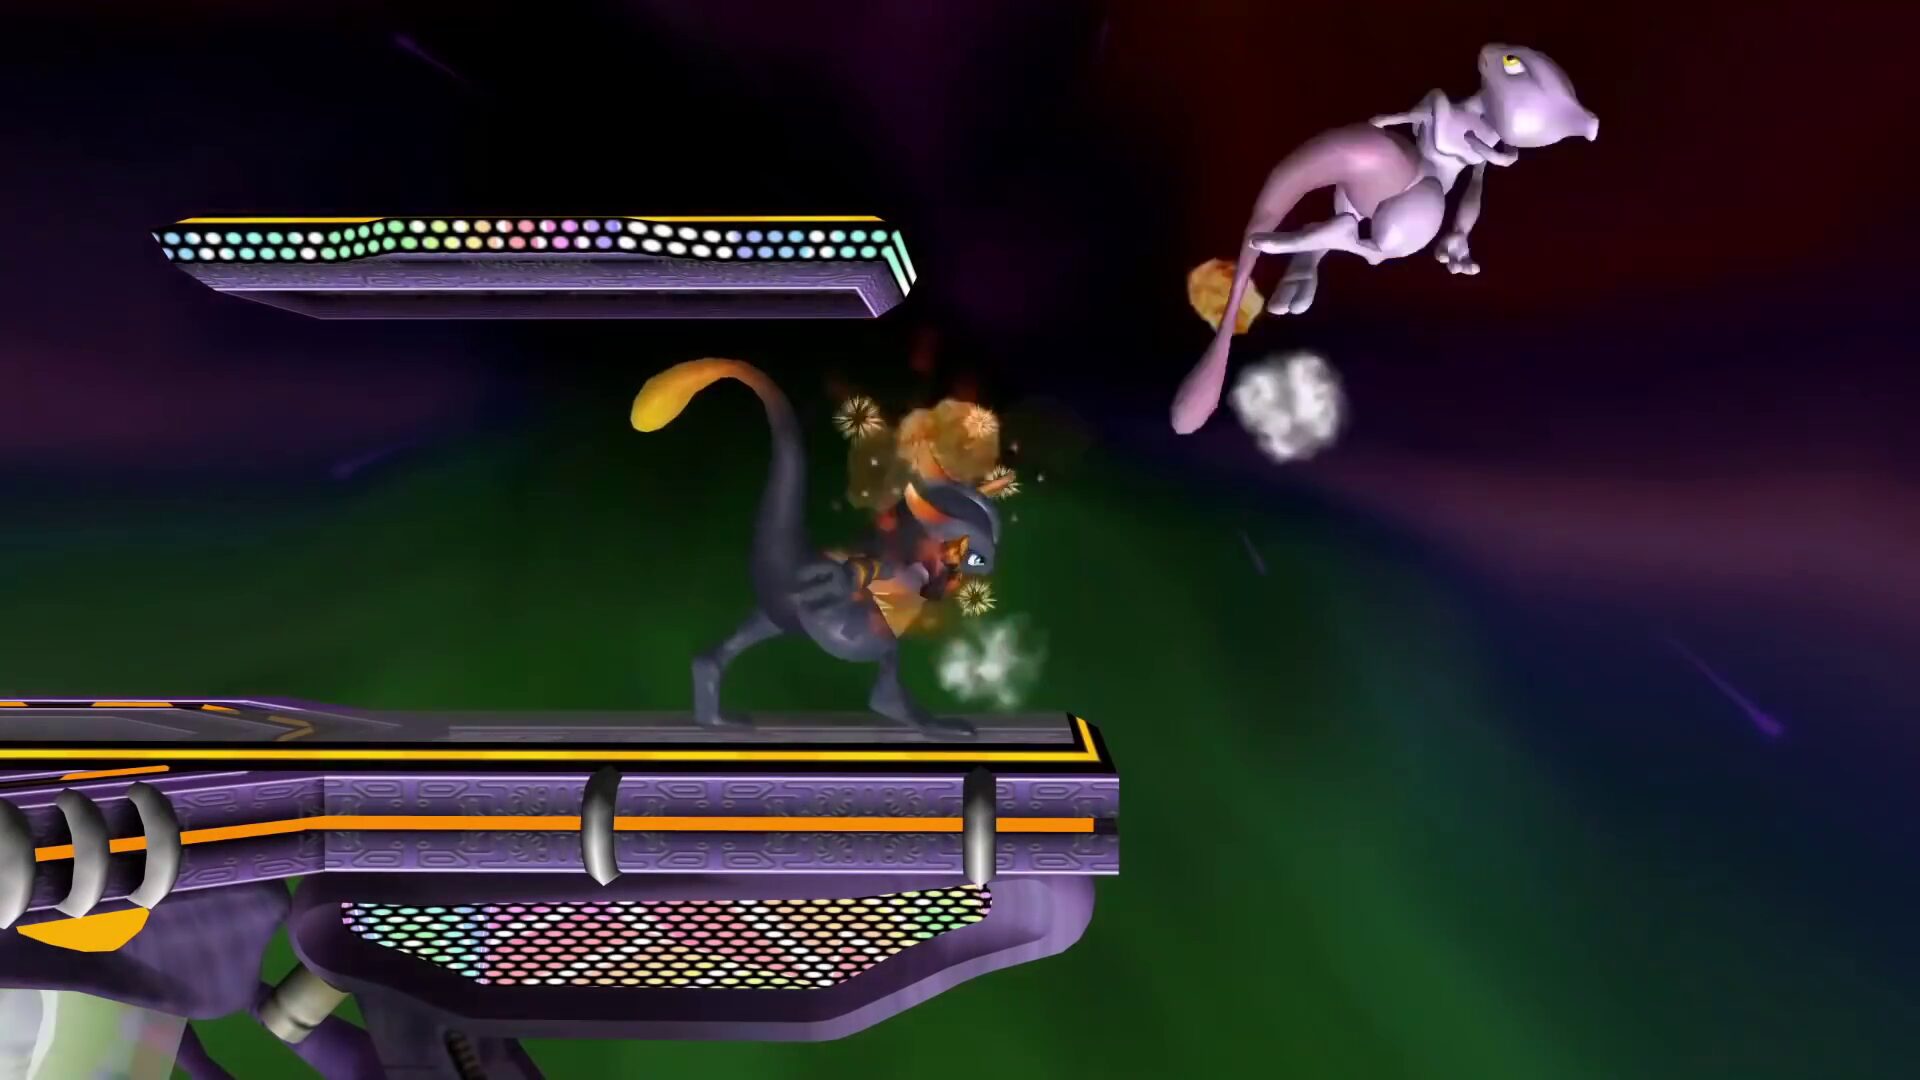 Mewtwo and Shadow Mewtwo face off on Battlefield